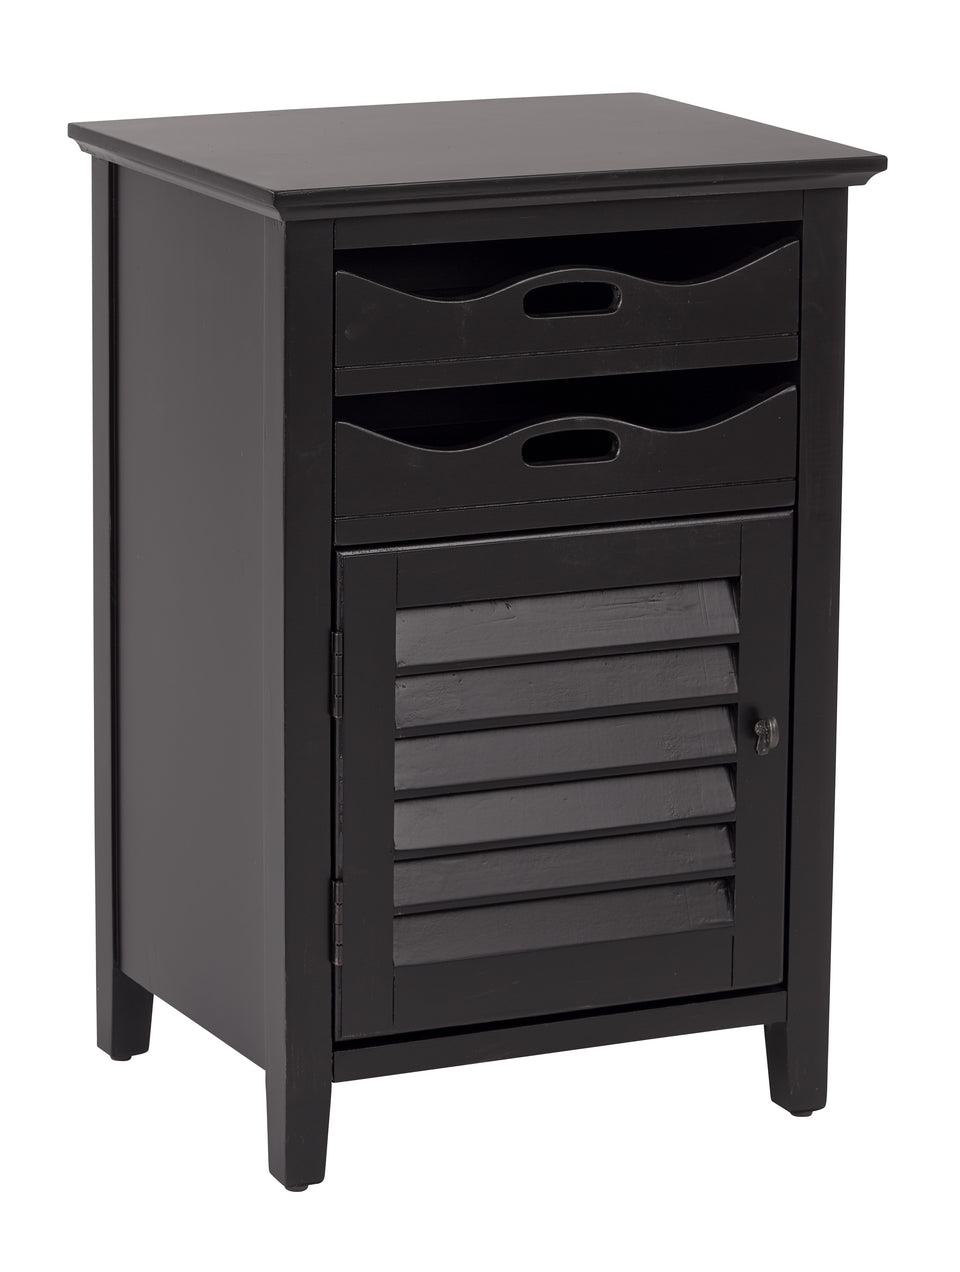 charlotte side table shutter door and two letter tray slide out drawers in black